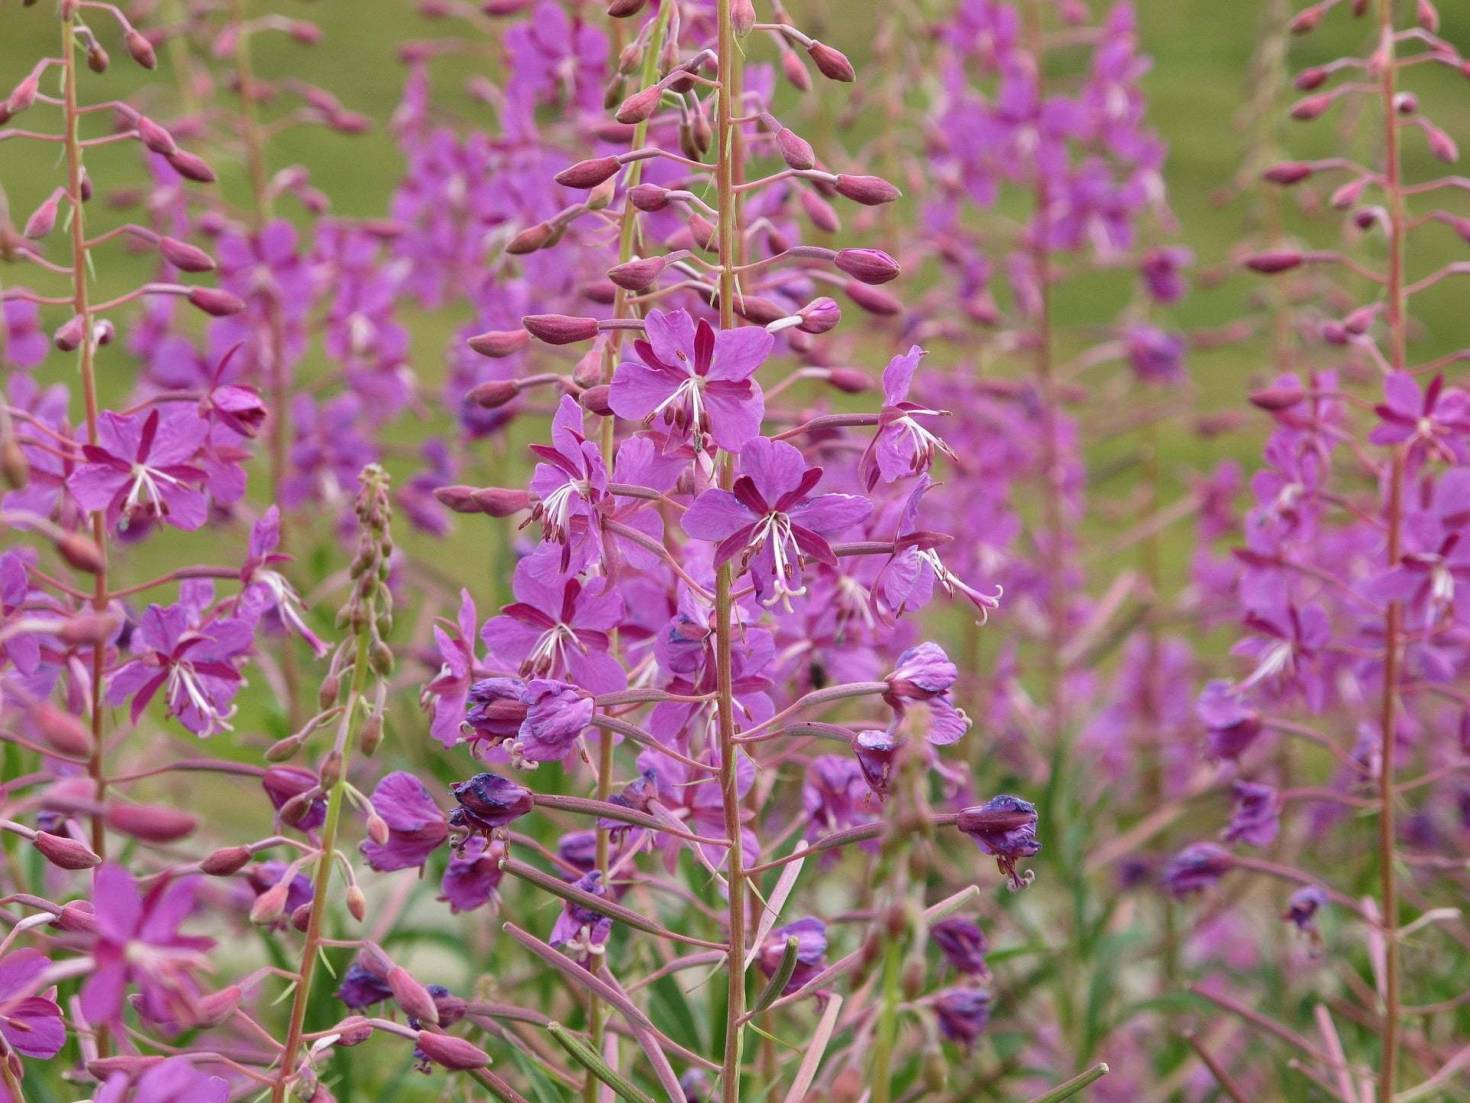 The Edible Plant Fireweed